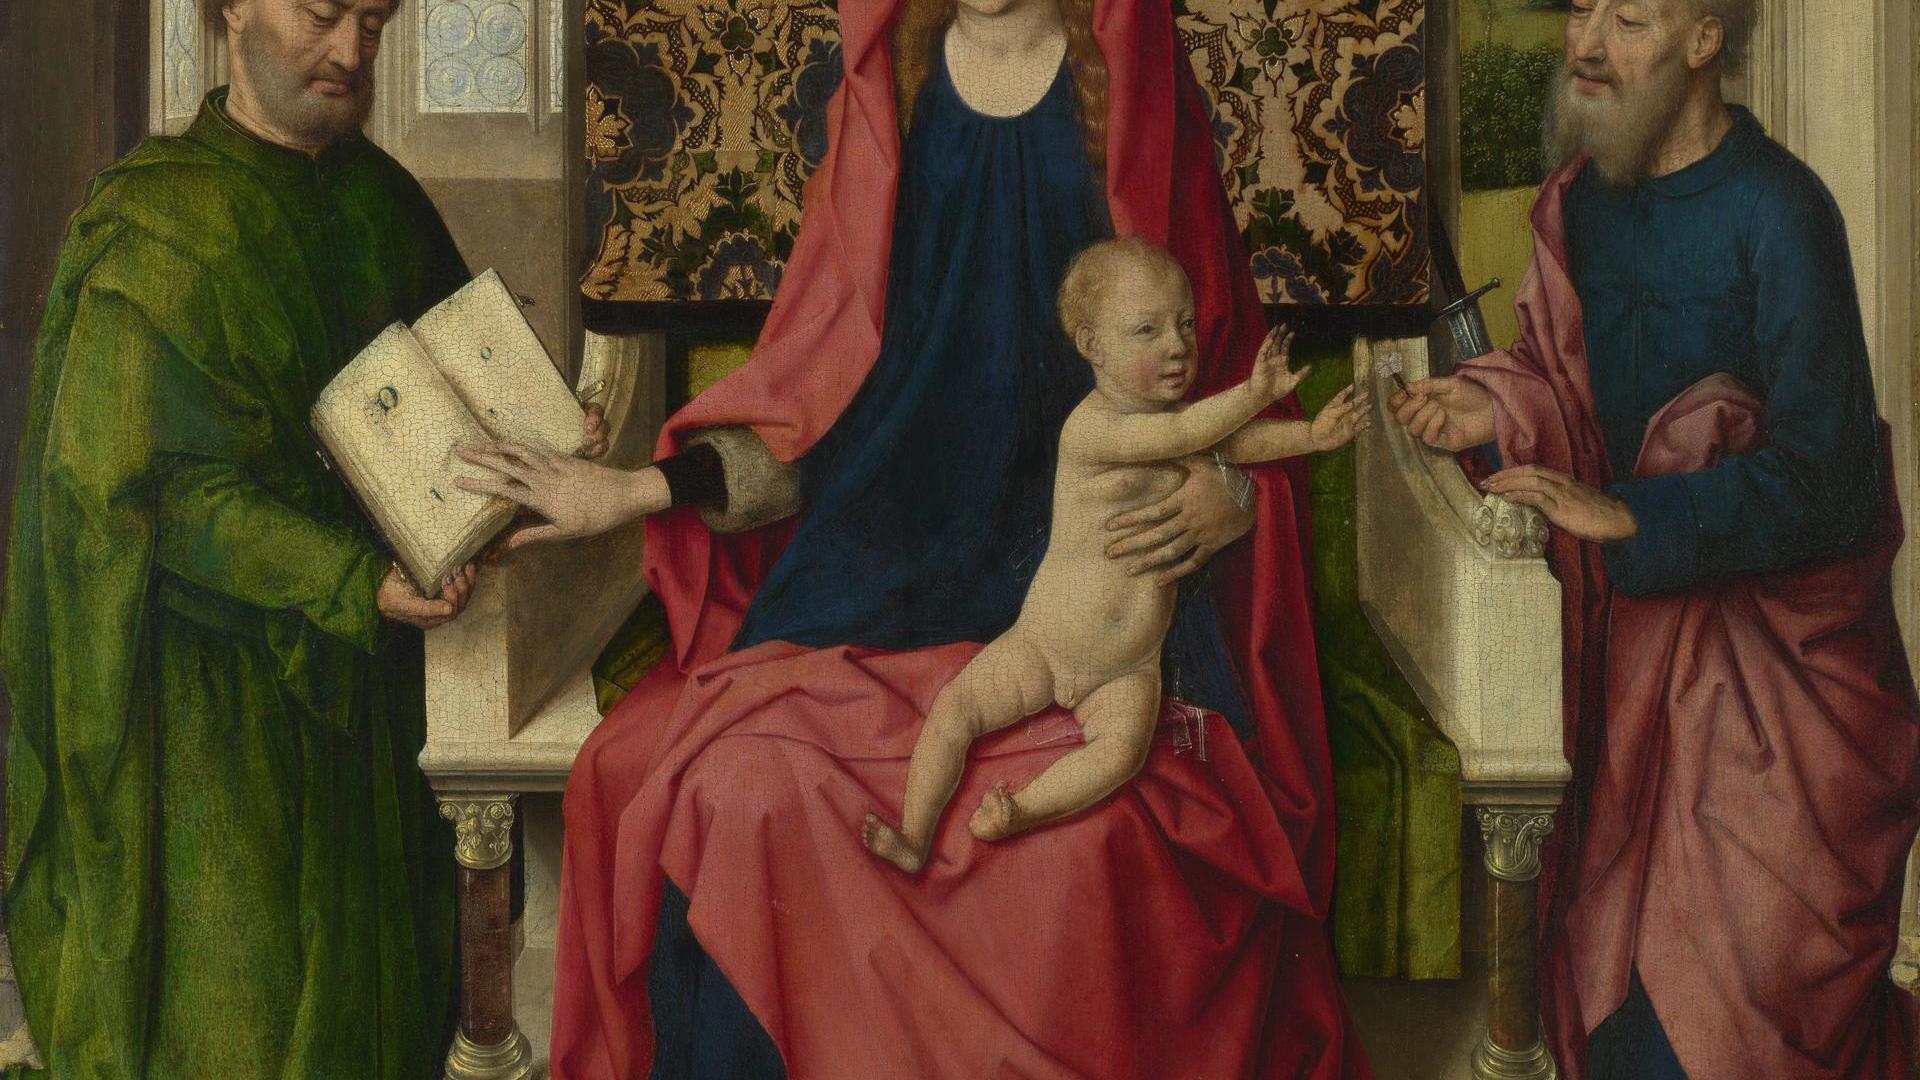 The Virgin and Child with Saint Peter and Saint Paul by Workshop of Dirk Bouts